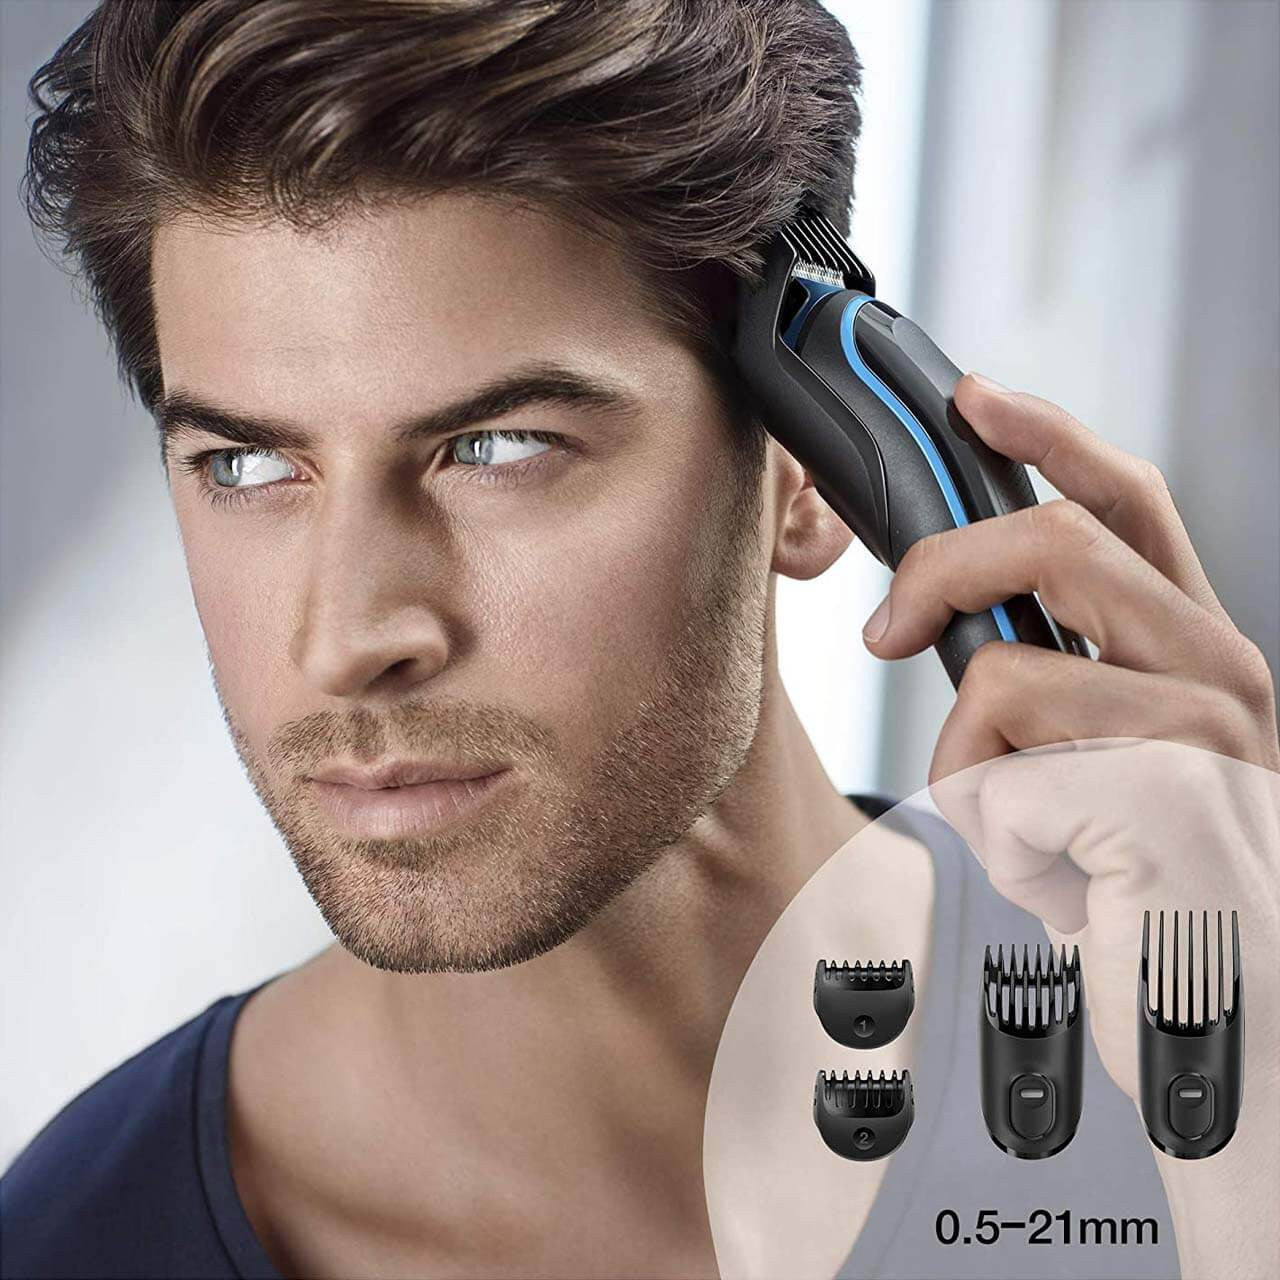 Braun All-in-one trimmer 3 for Face, Hair, and Body, Black/Blue 9-in-1 styling kit with Gillette Fusion5 ProGlide razor